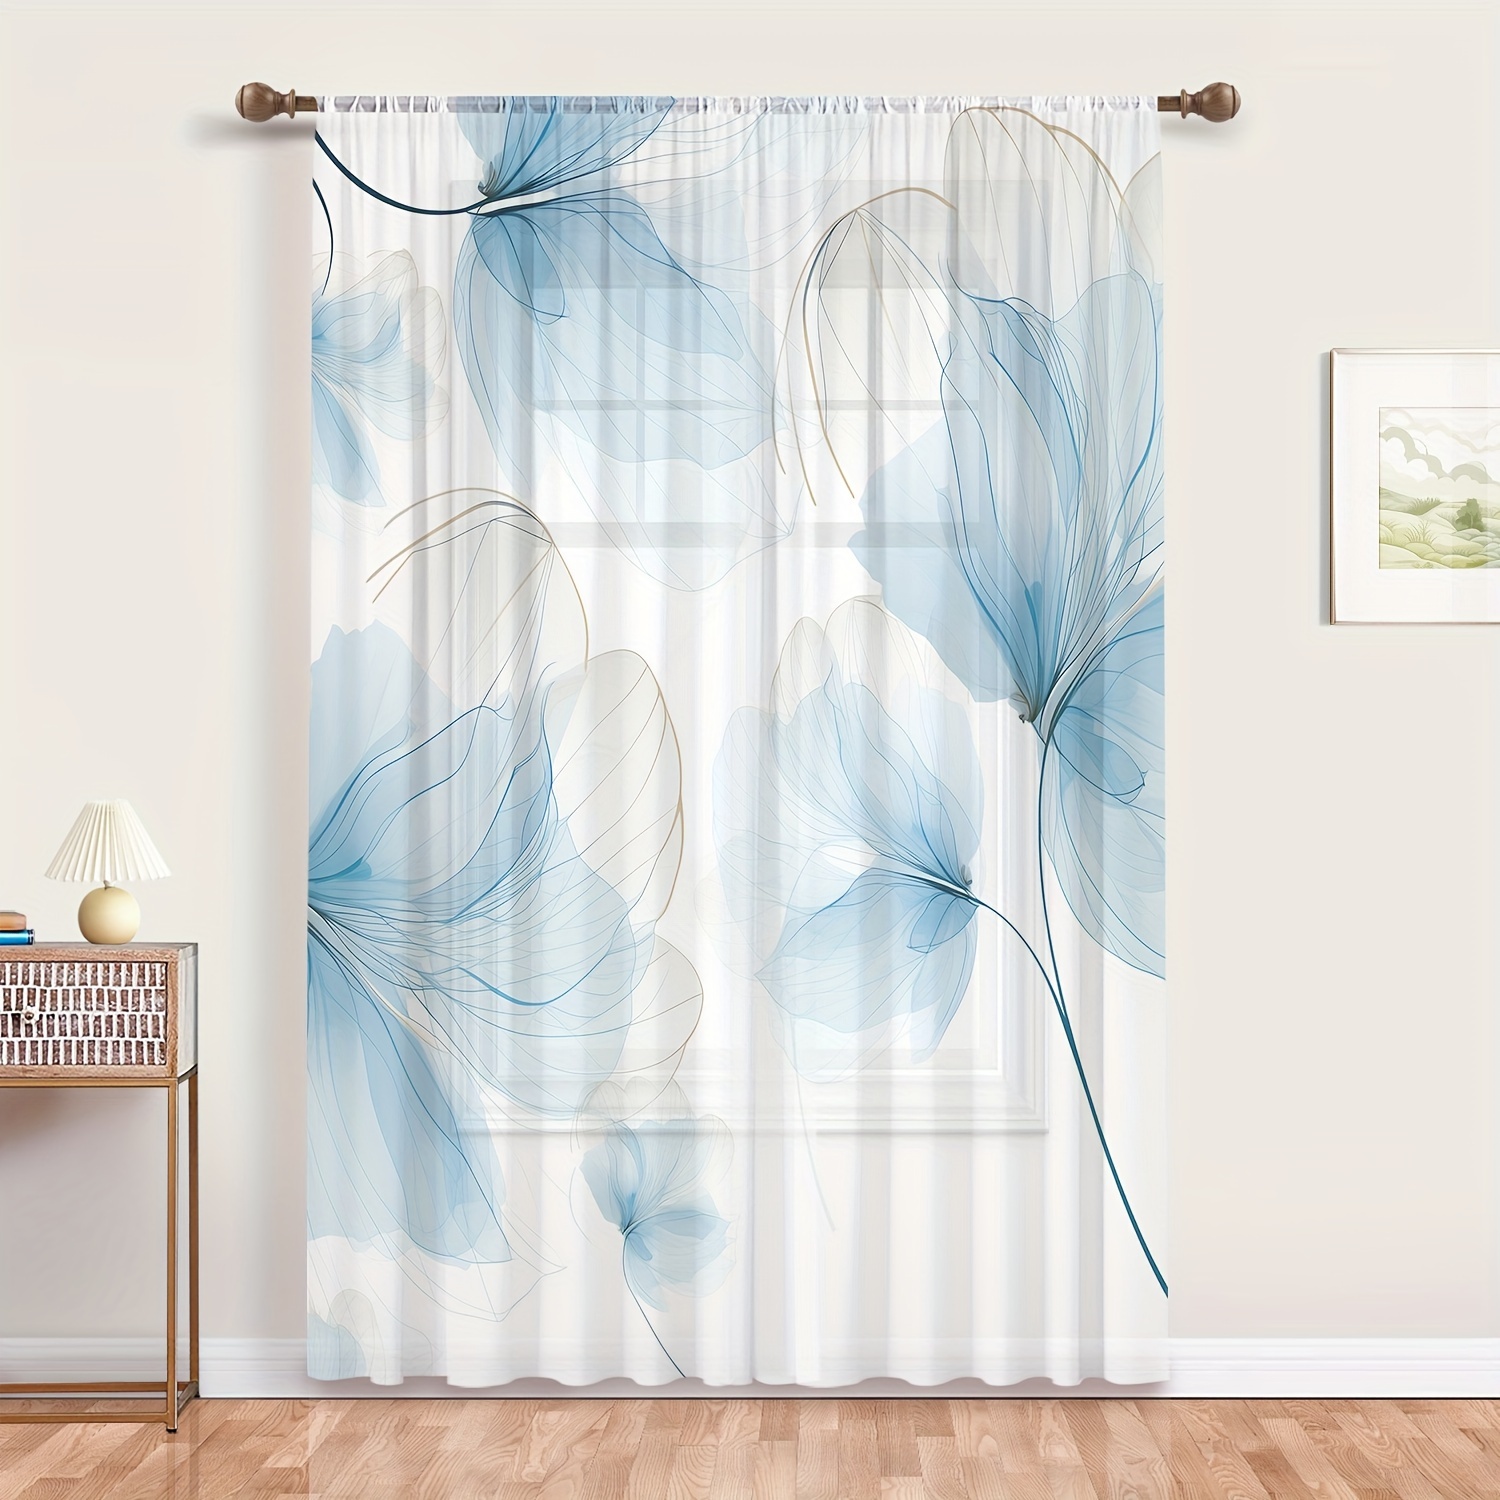 

Garden Style Semi-sheer Curtain Panel - Abstract Blue Gradient Flower Design Rod Pocket Drapes For Living Room, Bedroom, Home Decor - Machine Washable Polyester Floral Window Sheer, Single Panel